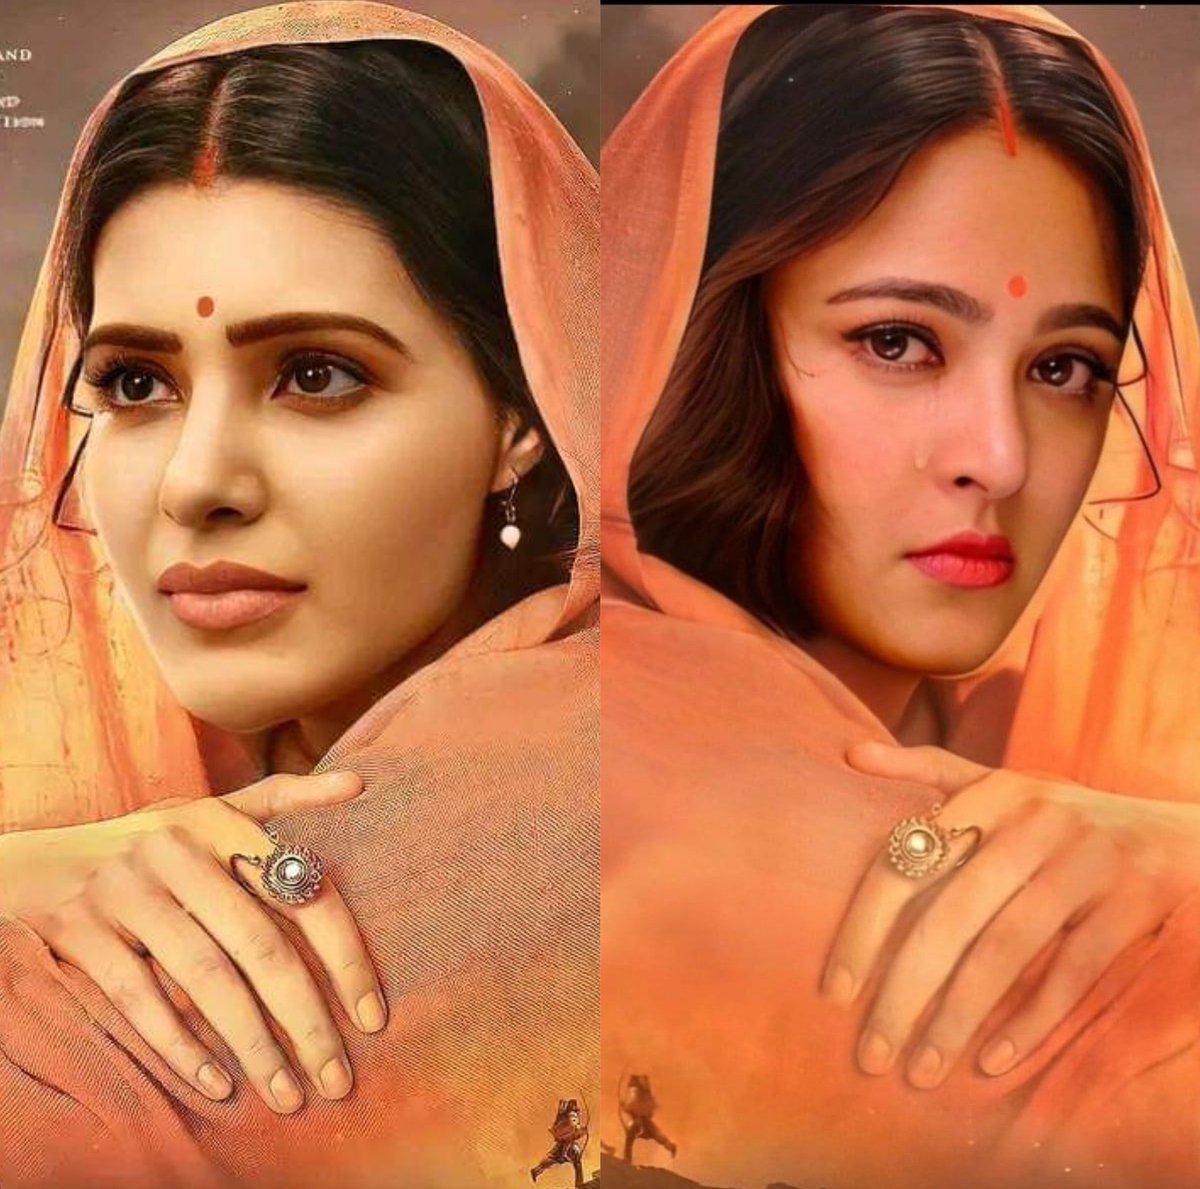 #Anushka sharp royal looks suits to queen roles more ❤️‍🔥
#Samantha would be better choice  as 'Sita' both looks wise & acting wise. She has that innocence 😍, soft, intense eyes to emote love and deeper emotions that shows her inner strength beautifully ❤️
#SamanthaRuthPrabhu